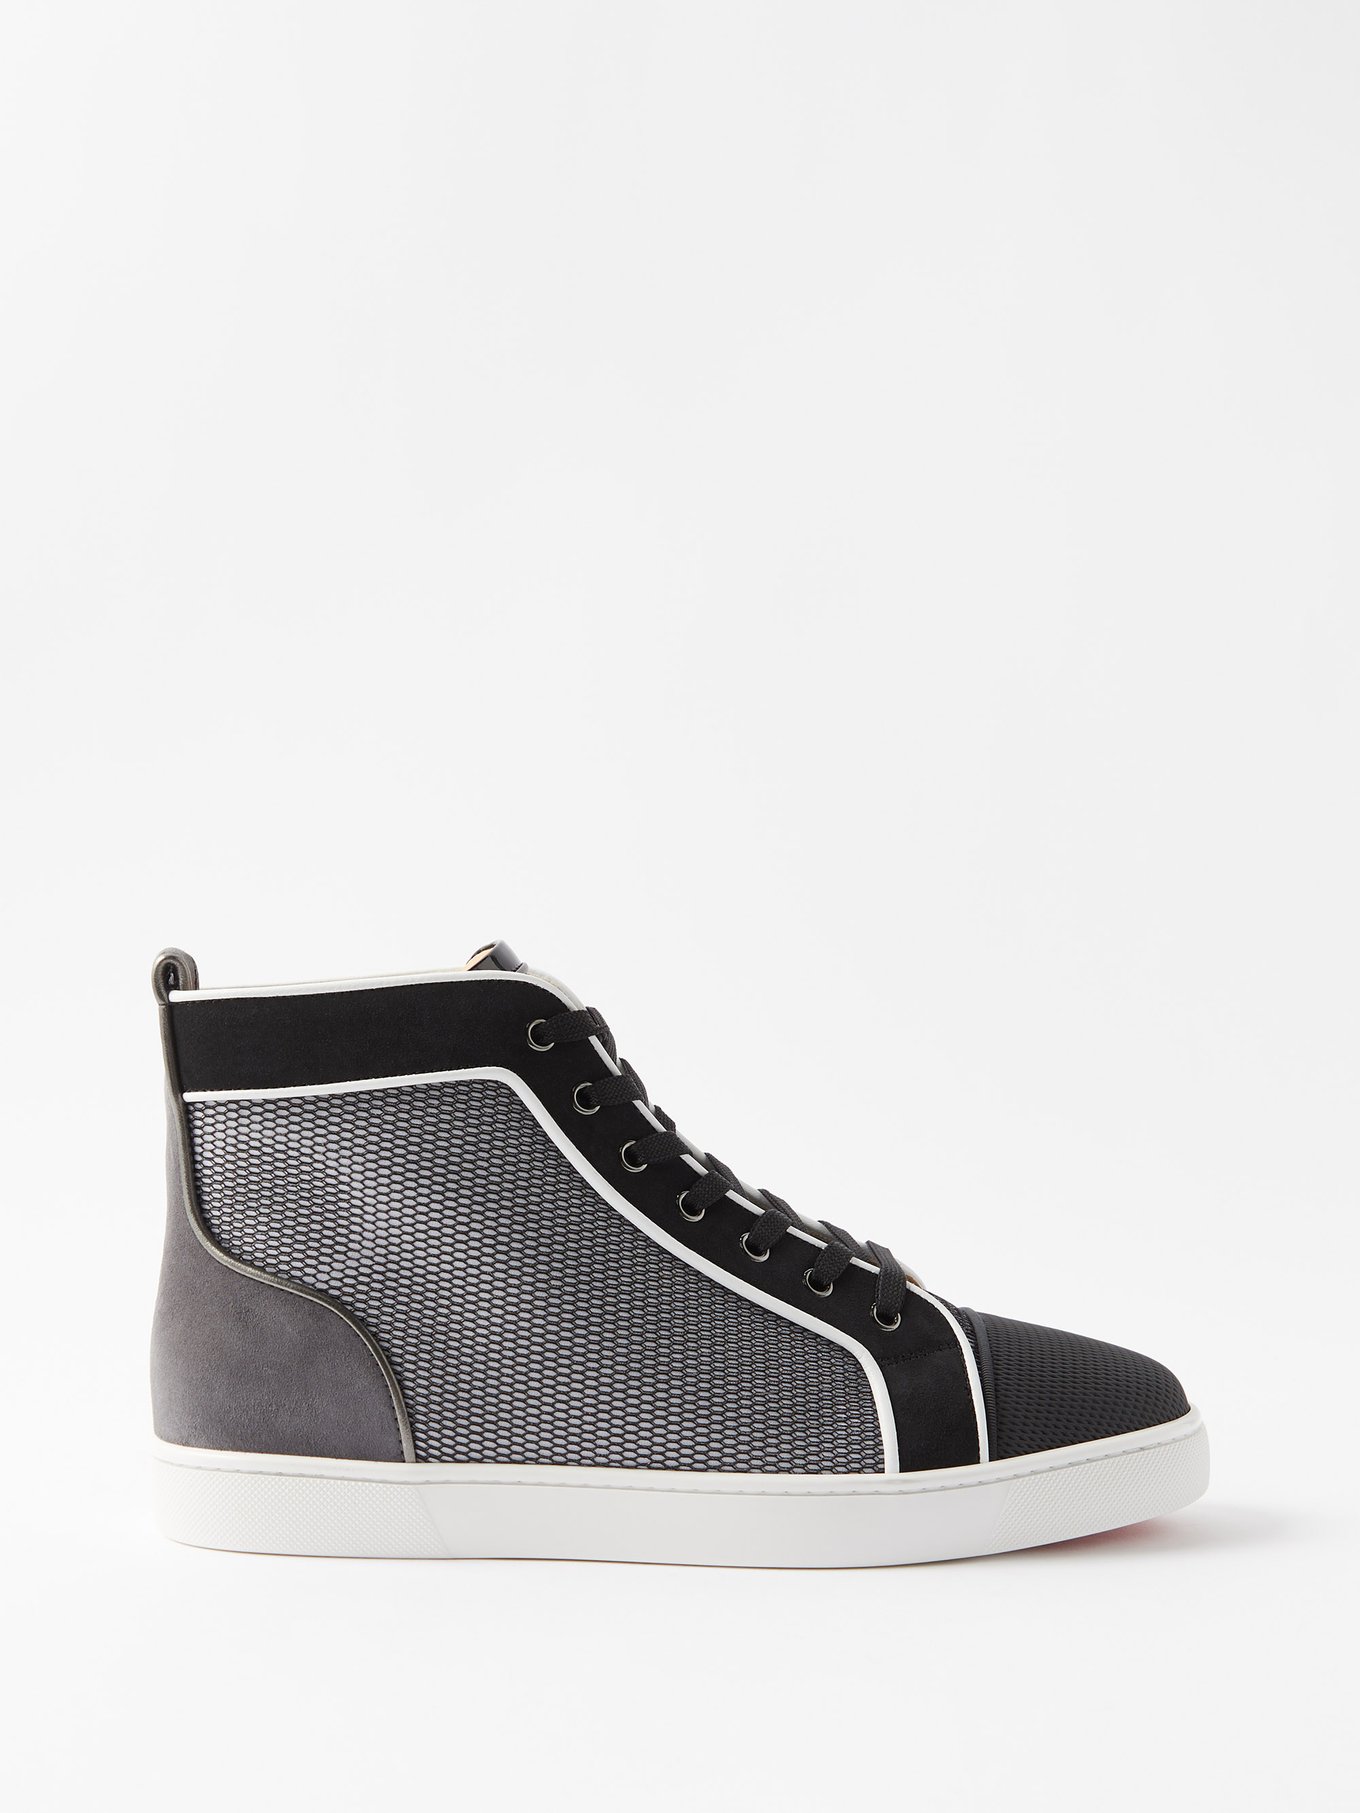 Black Louis Orlato suede and mesh high-top trainers, Christian Louboutin